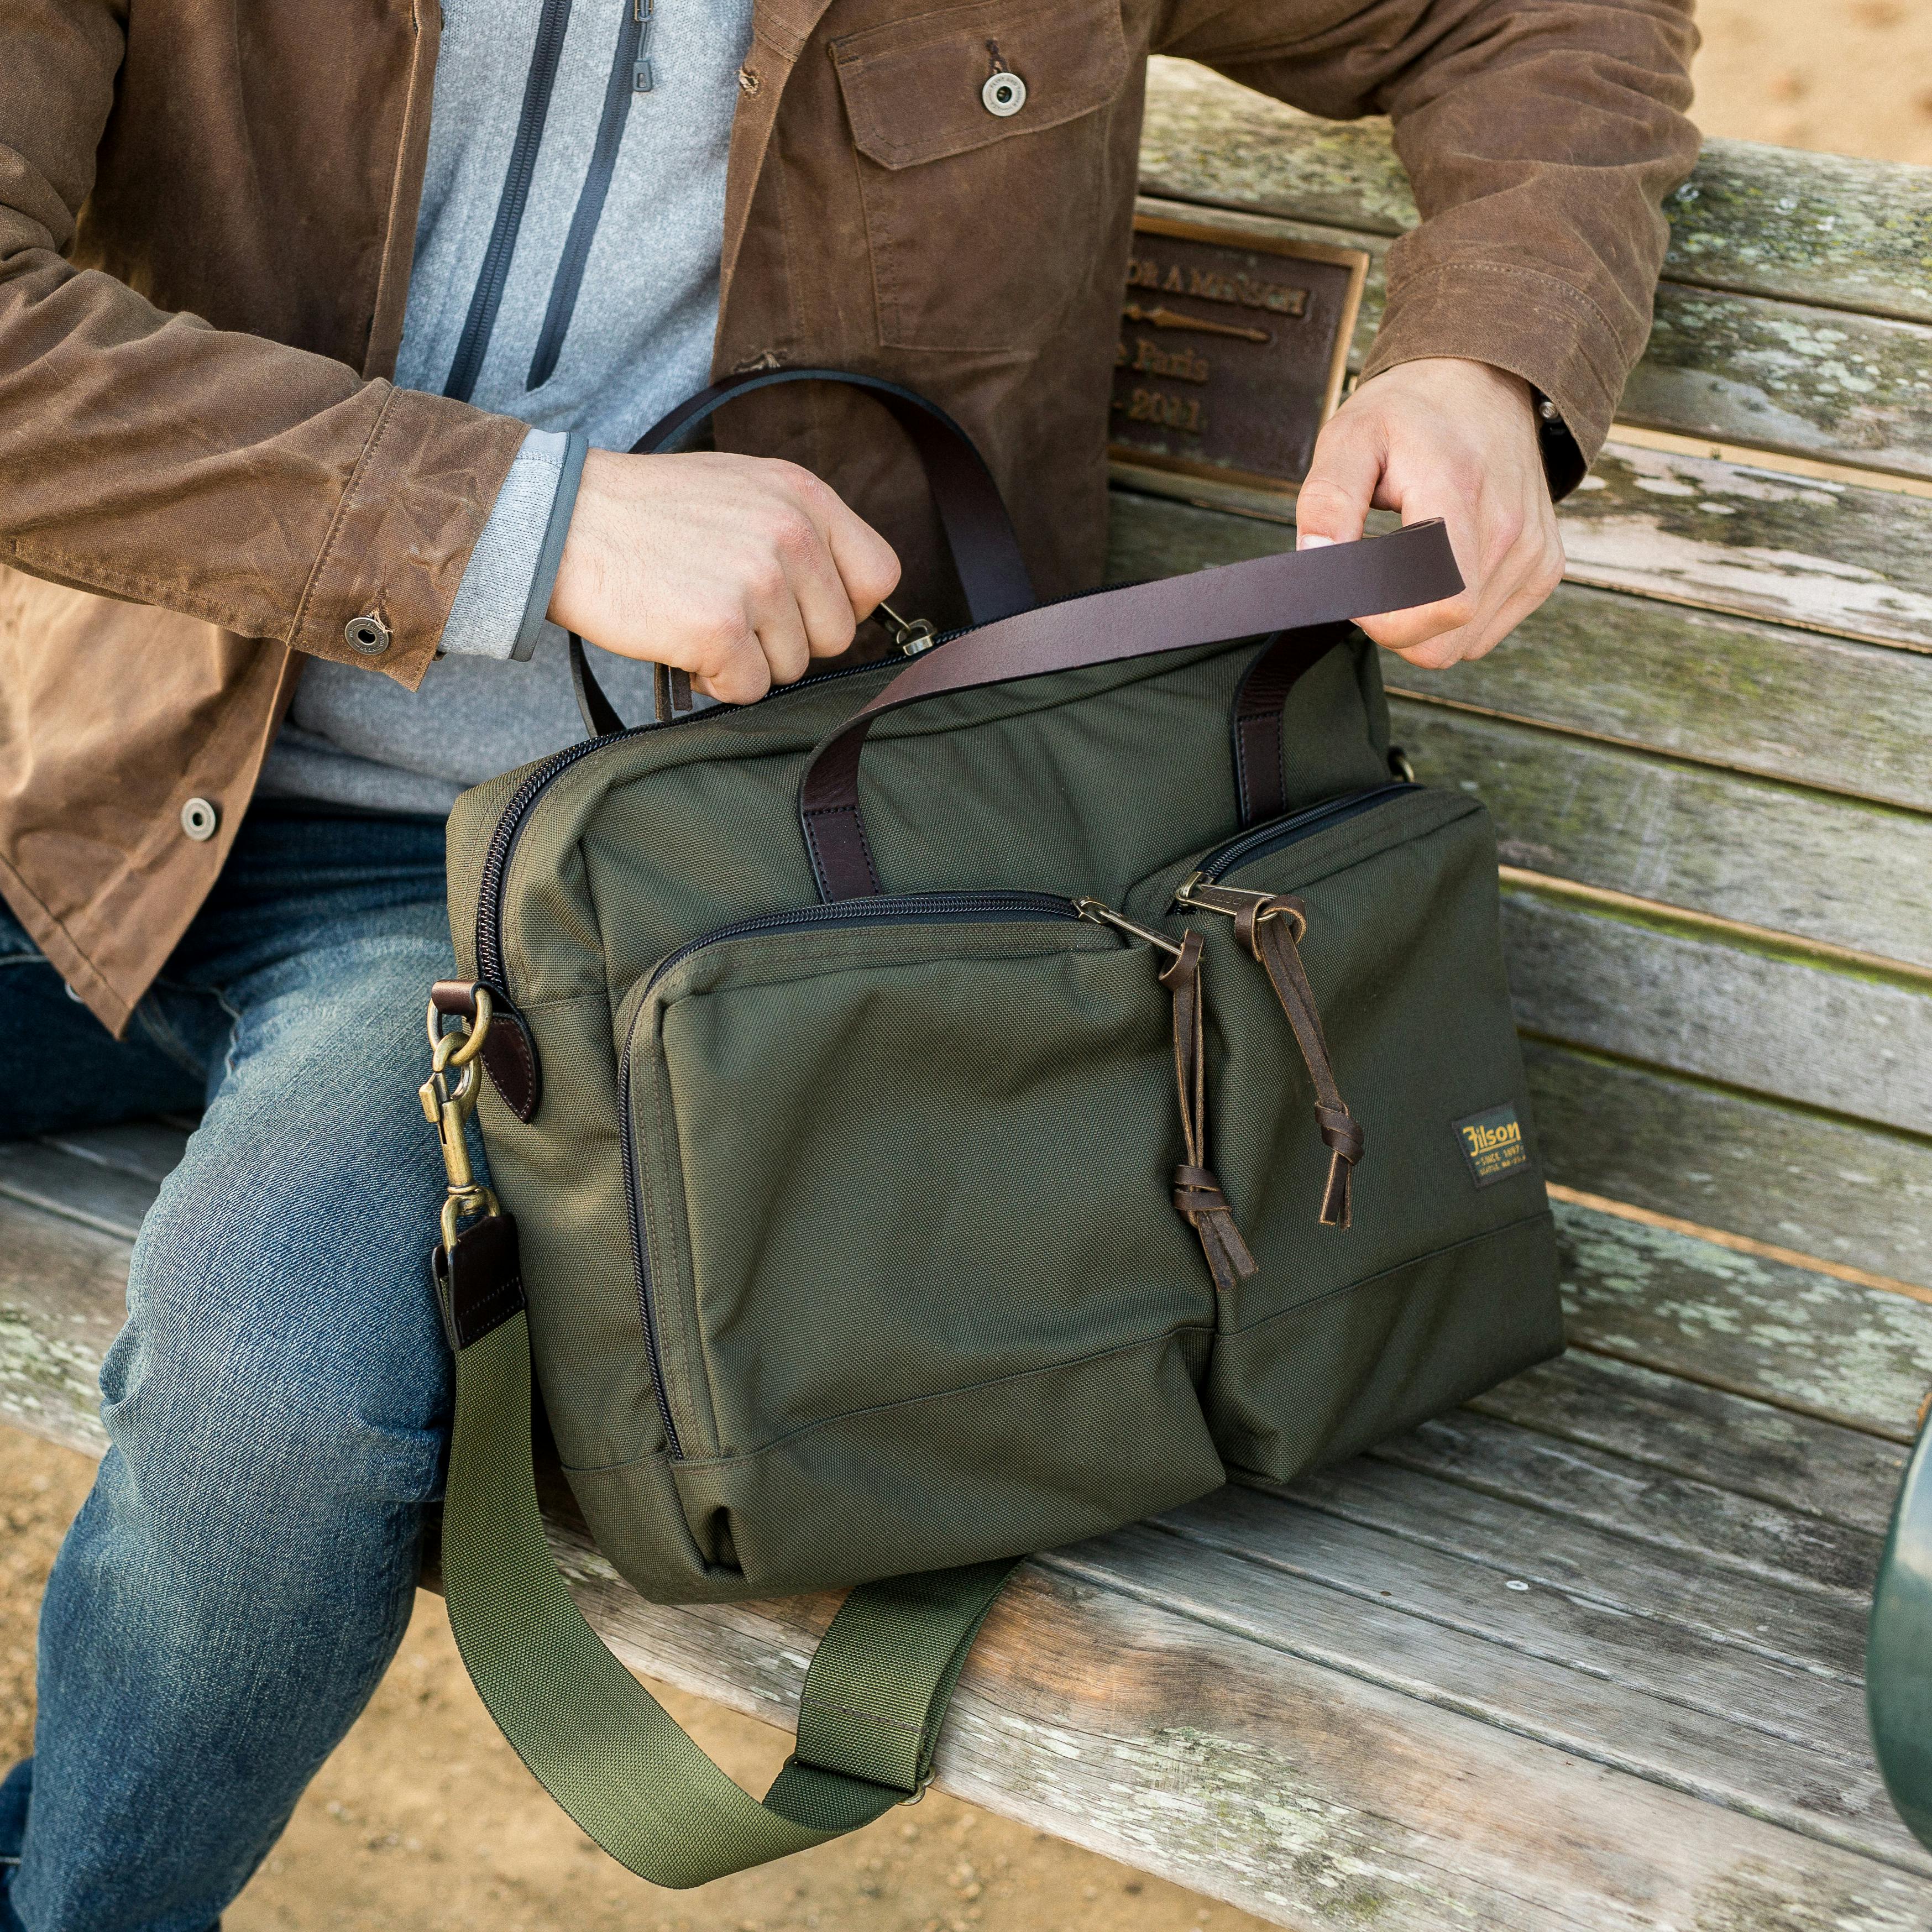 Leather Vs. Ballistic Nylon Briefcases: Which Material is Best?